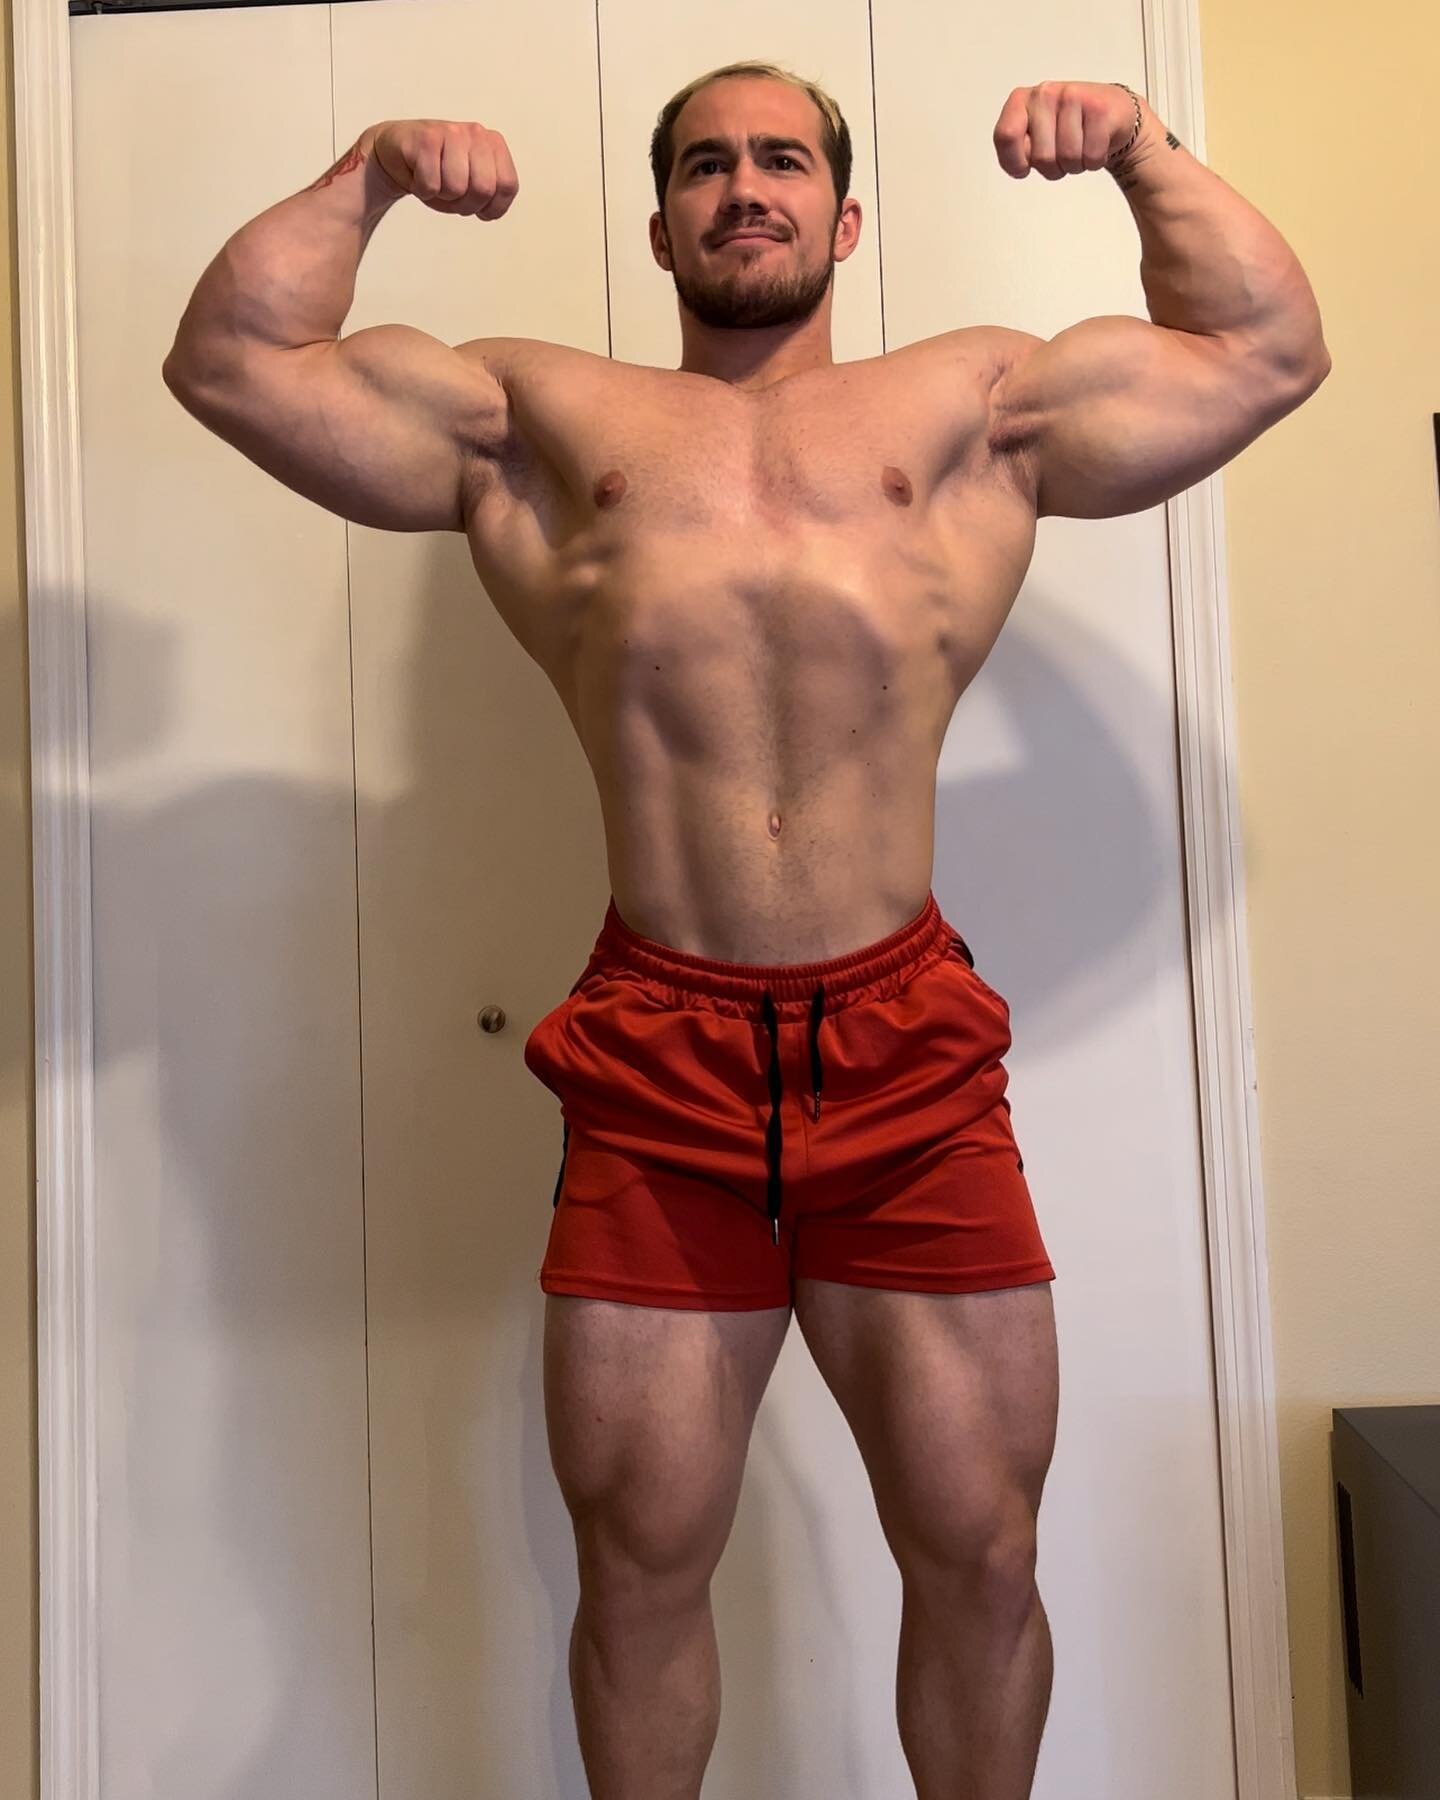 Was back and forth on whether to post these. However, one of the three posing rounds for the week. Fasted. All I can say is I&rsquo;m very happy with how we&rsquo;re setting ourselves up for prep this year. 
.
For coaching inquiries, shoot me a dm or